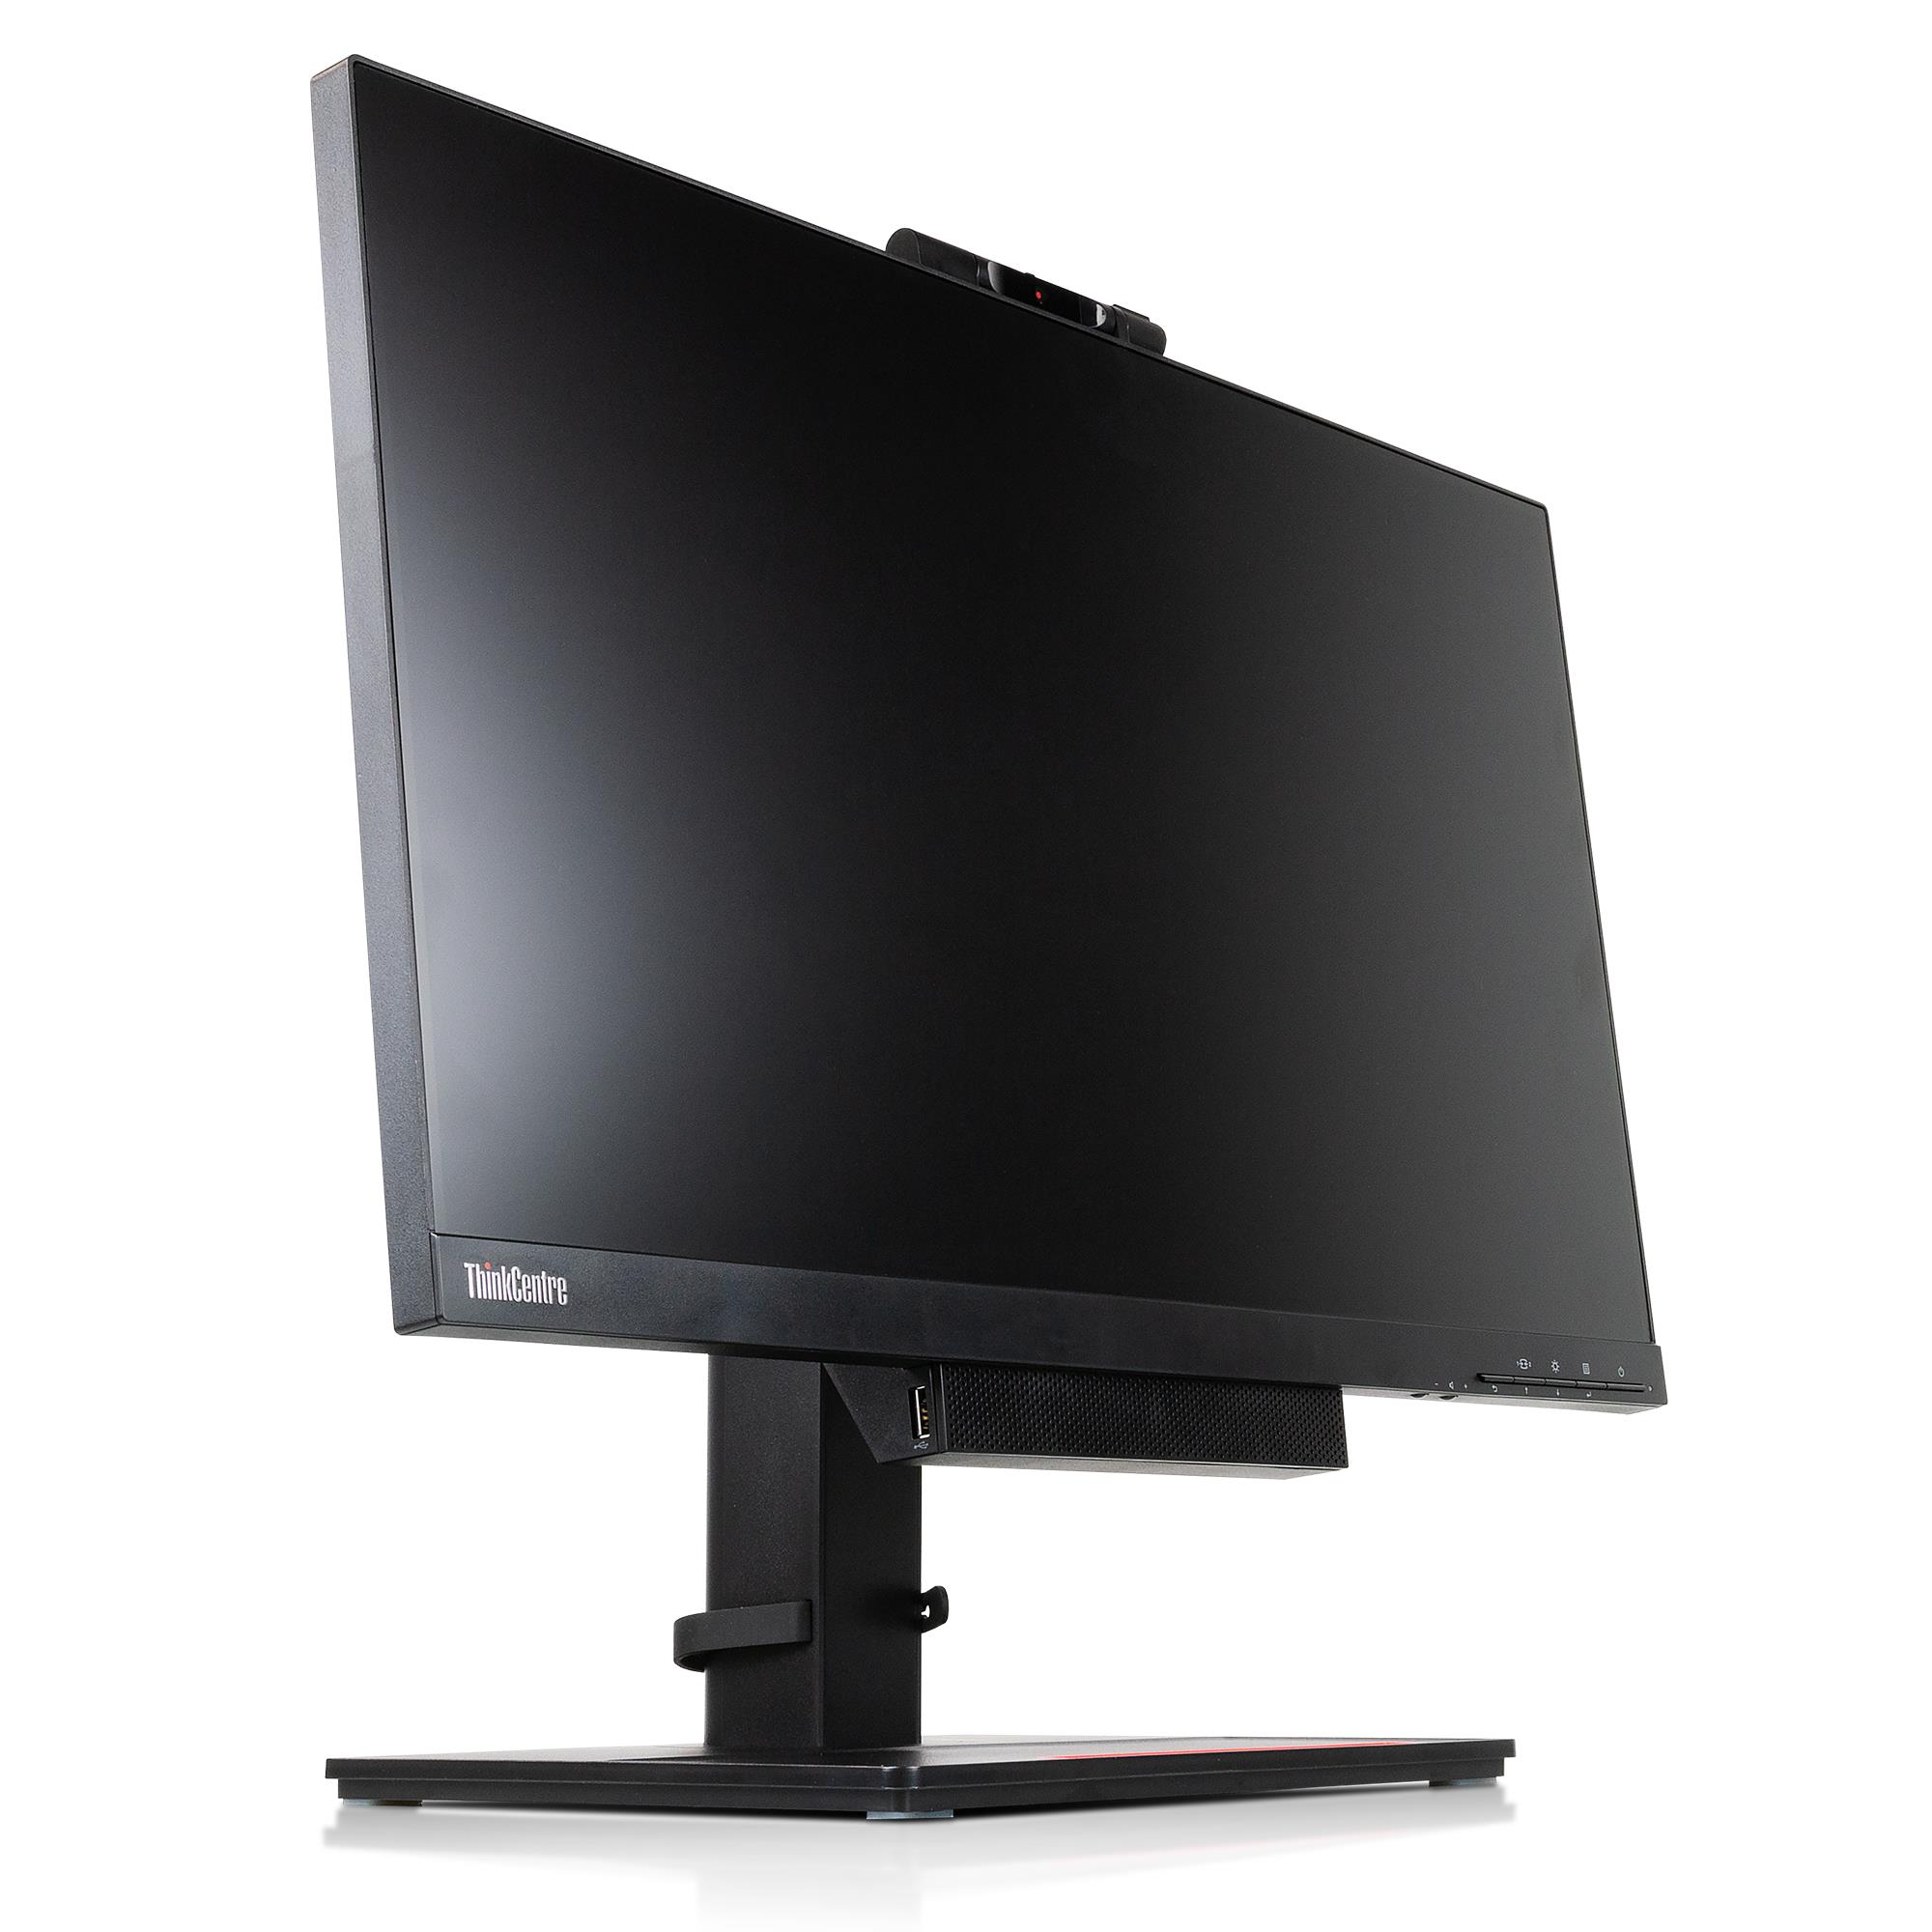 LENOVO REFURBISHED (*) Reaktionszeit ThinkCentre (14 ms Zoll 23,80 24 ) Full-HD TFT-Monitor Gen4 Tiny-in-One